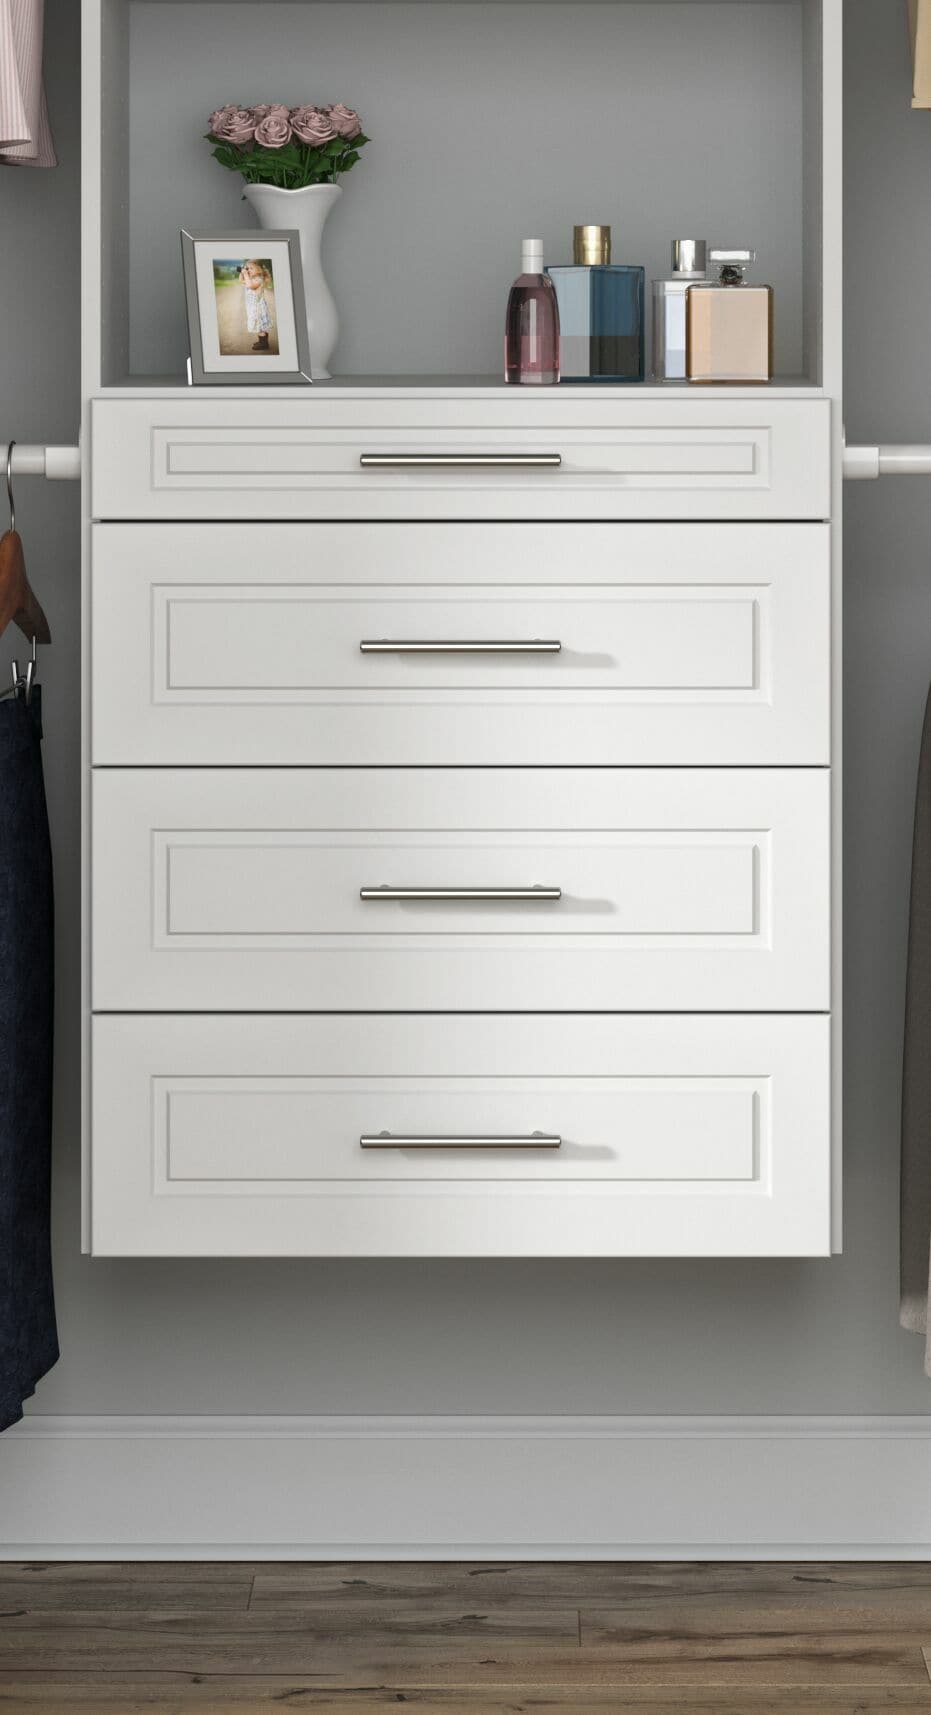 Easy Track 4 in. Deluxe Drawer - White